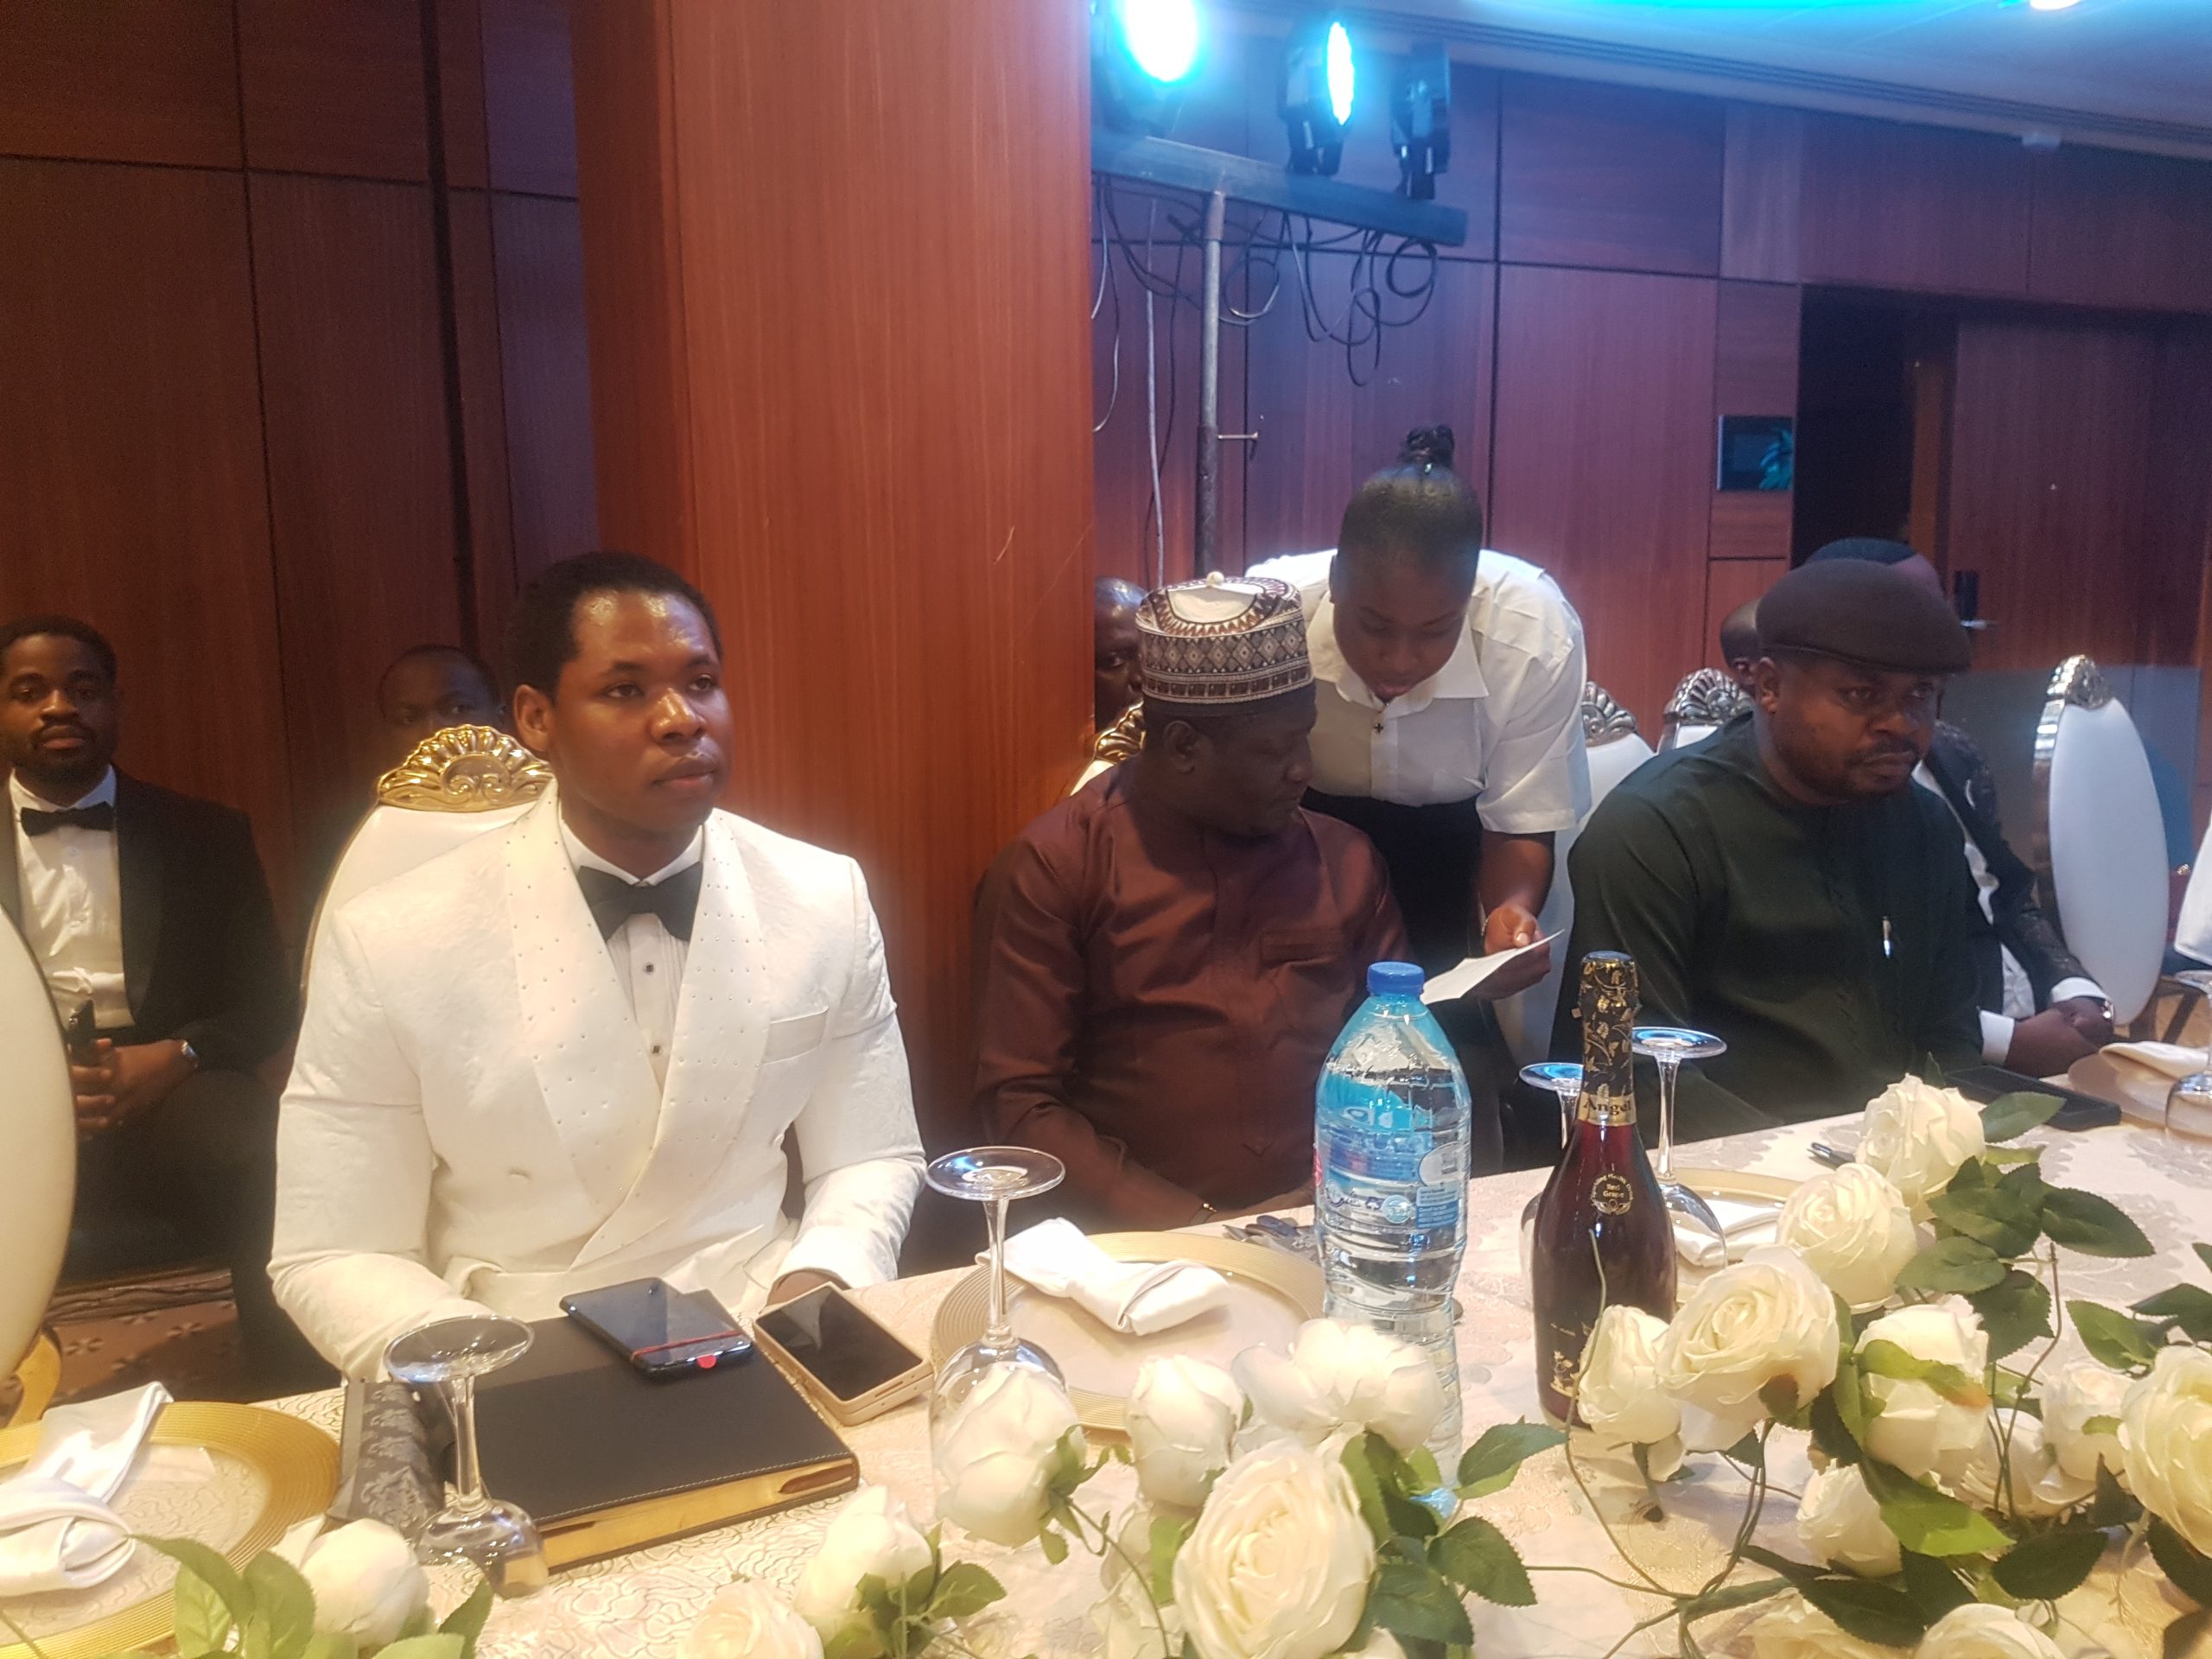 Nigerians Unite For Africa And Global Impact At First Loveworld State Dinner In Abuja